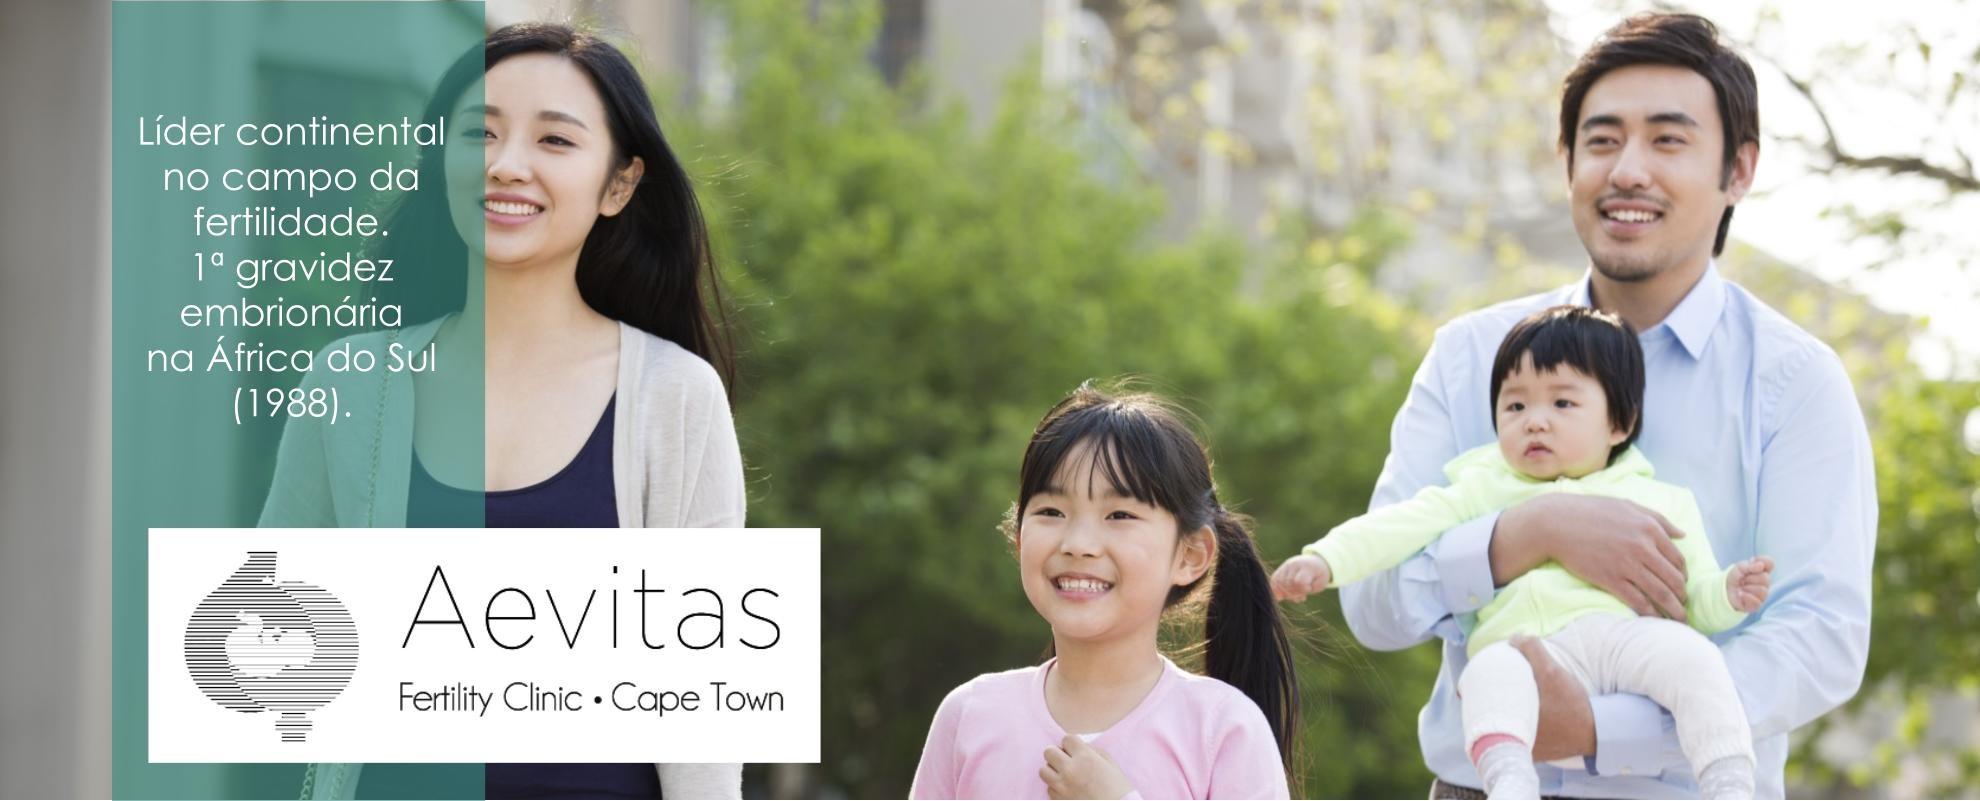 Aevitas Fertility Clinic for International patients from Portuguese speaking countries